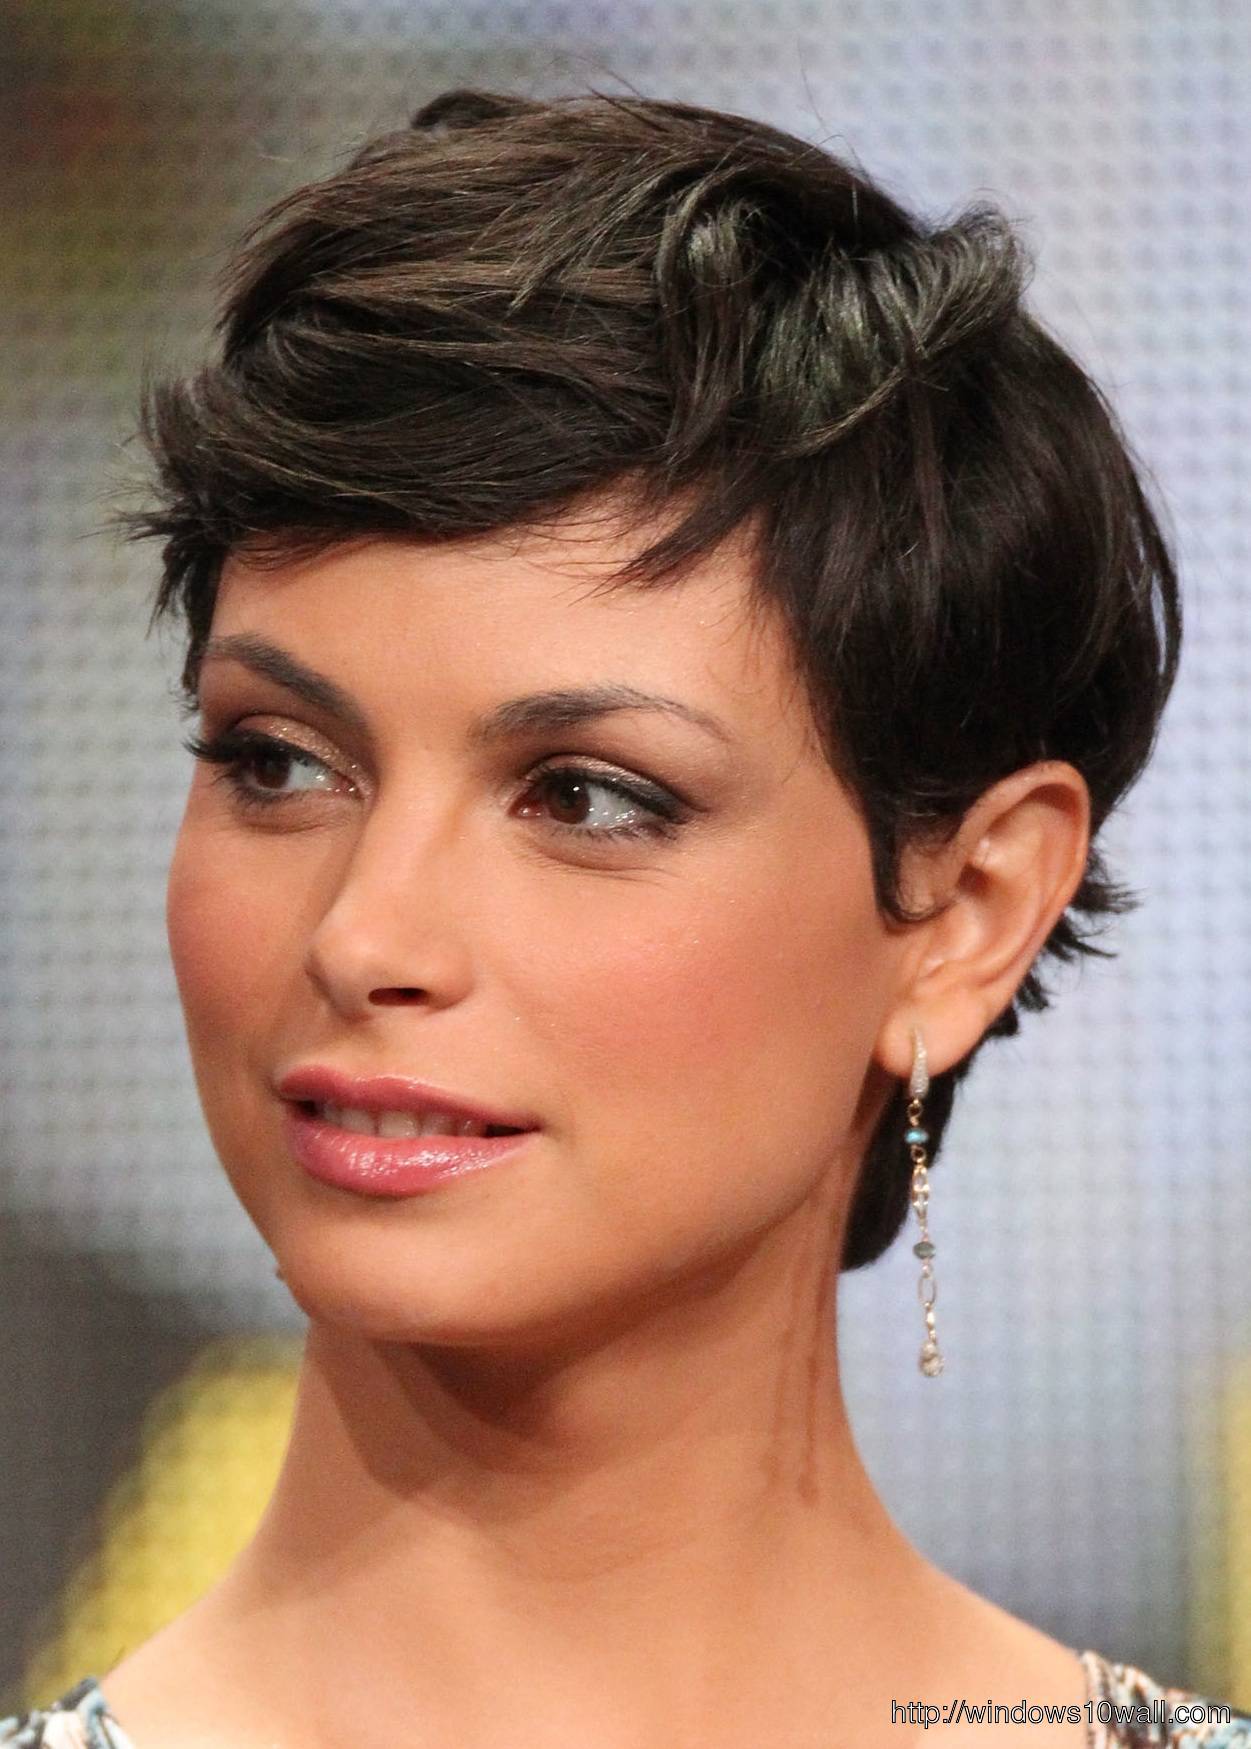 pixie-cut-hairstyles-morena-baccarin-background-wallpaper